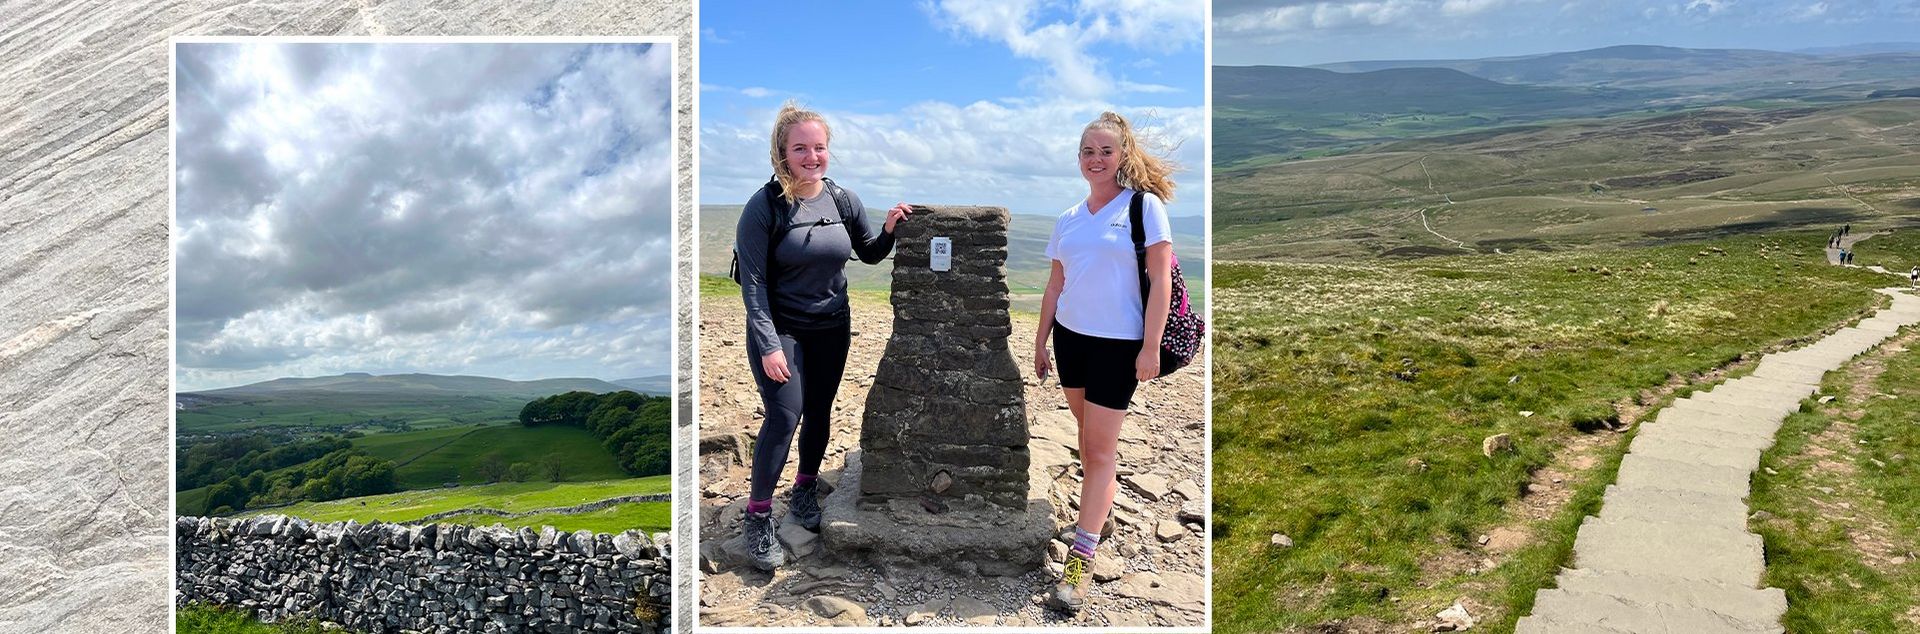 A selection of photos of the Pen-Y-Ghent walking trail in The Yorkshire Dales